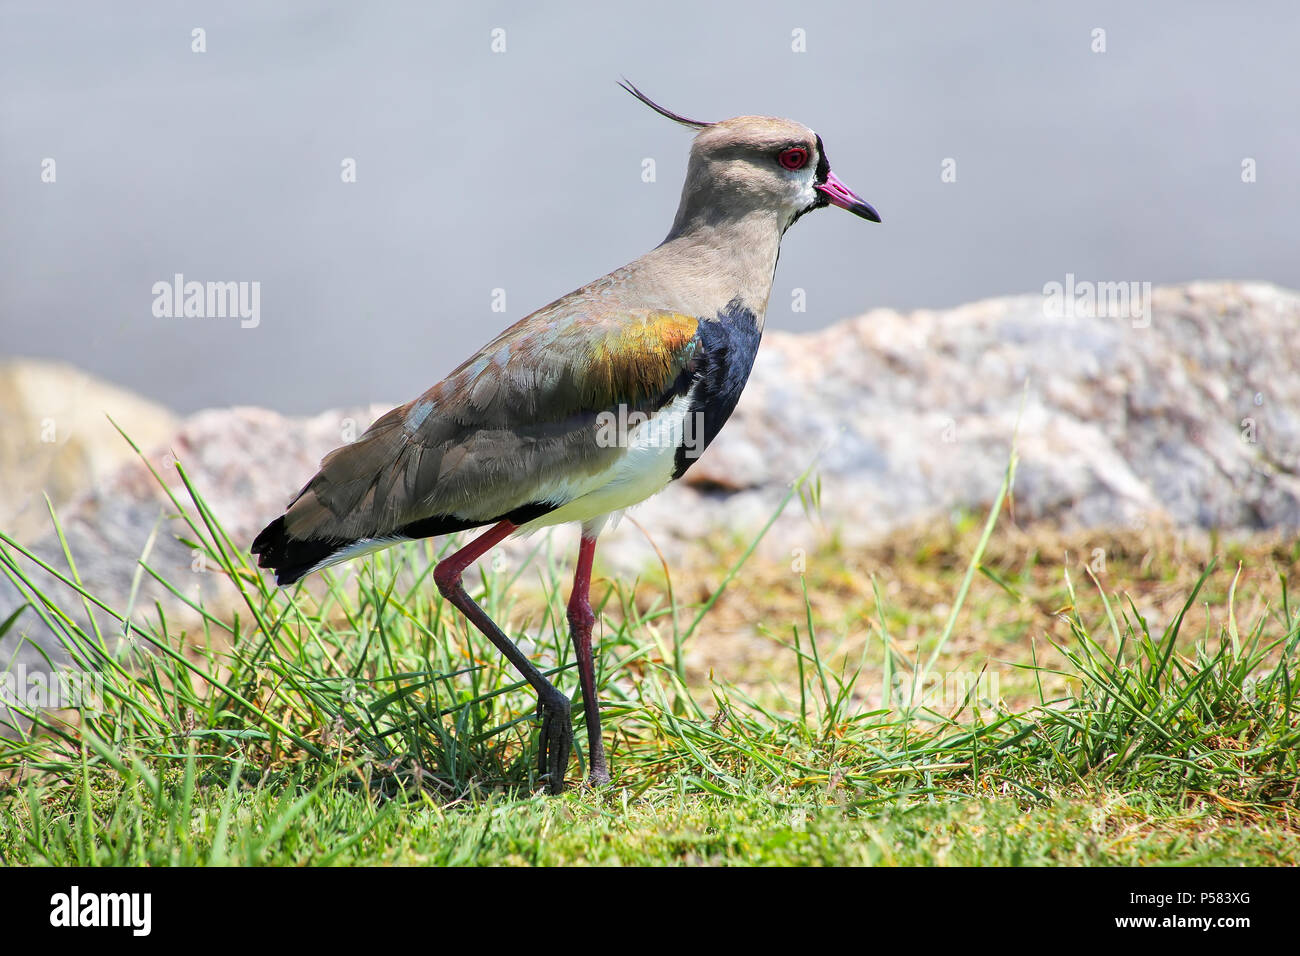 Southern Lapwing (Vanellus chilensis) on the bank of Plate River in Montevideo, Uruguay. This bird is the national bird of Uruguay. Stock Photo